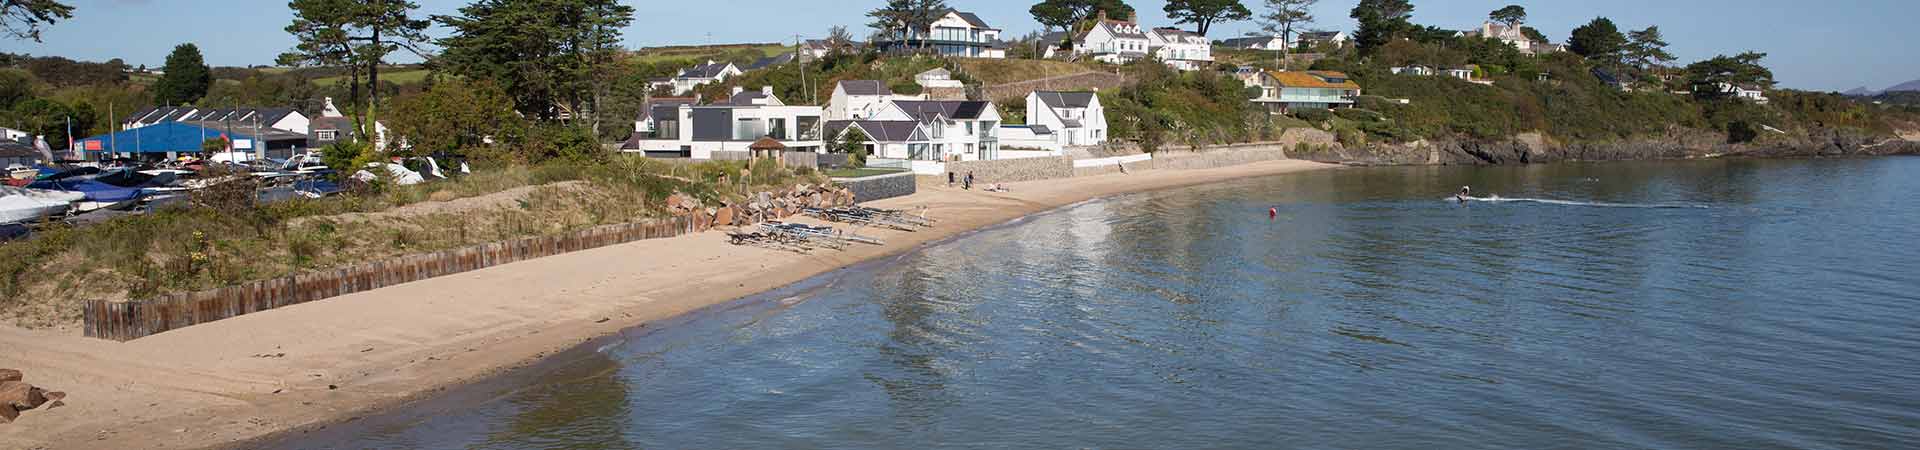 Cottages in Abersoch